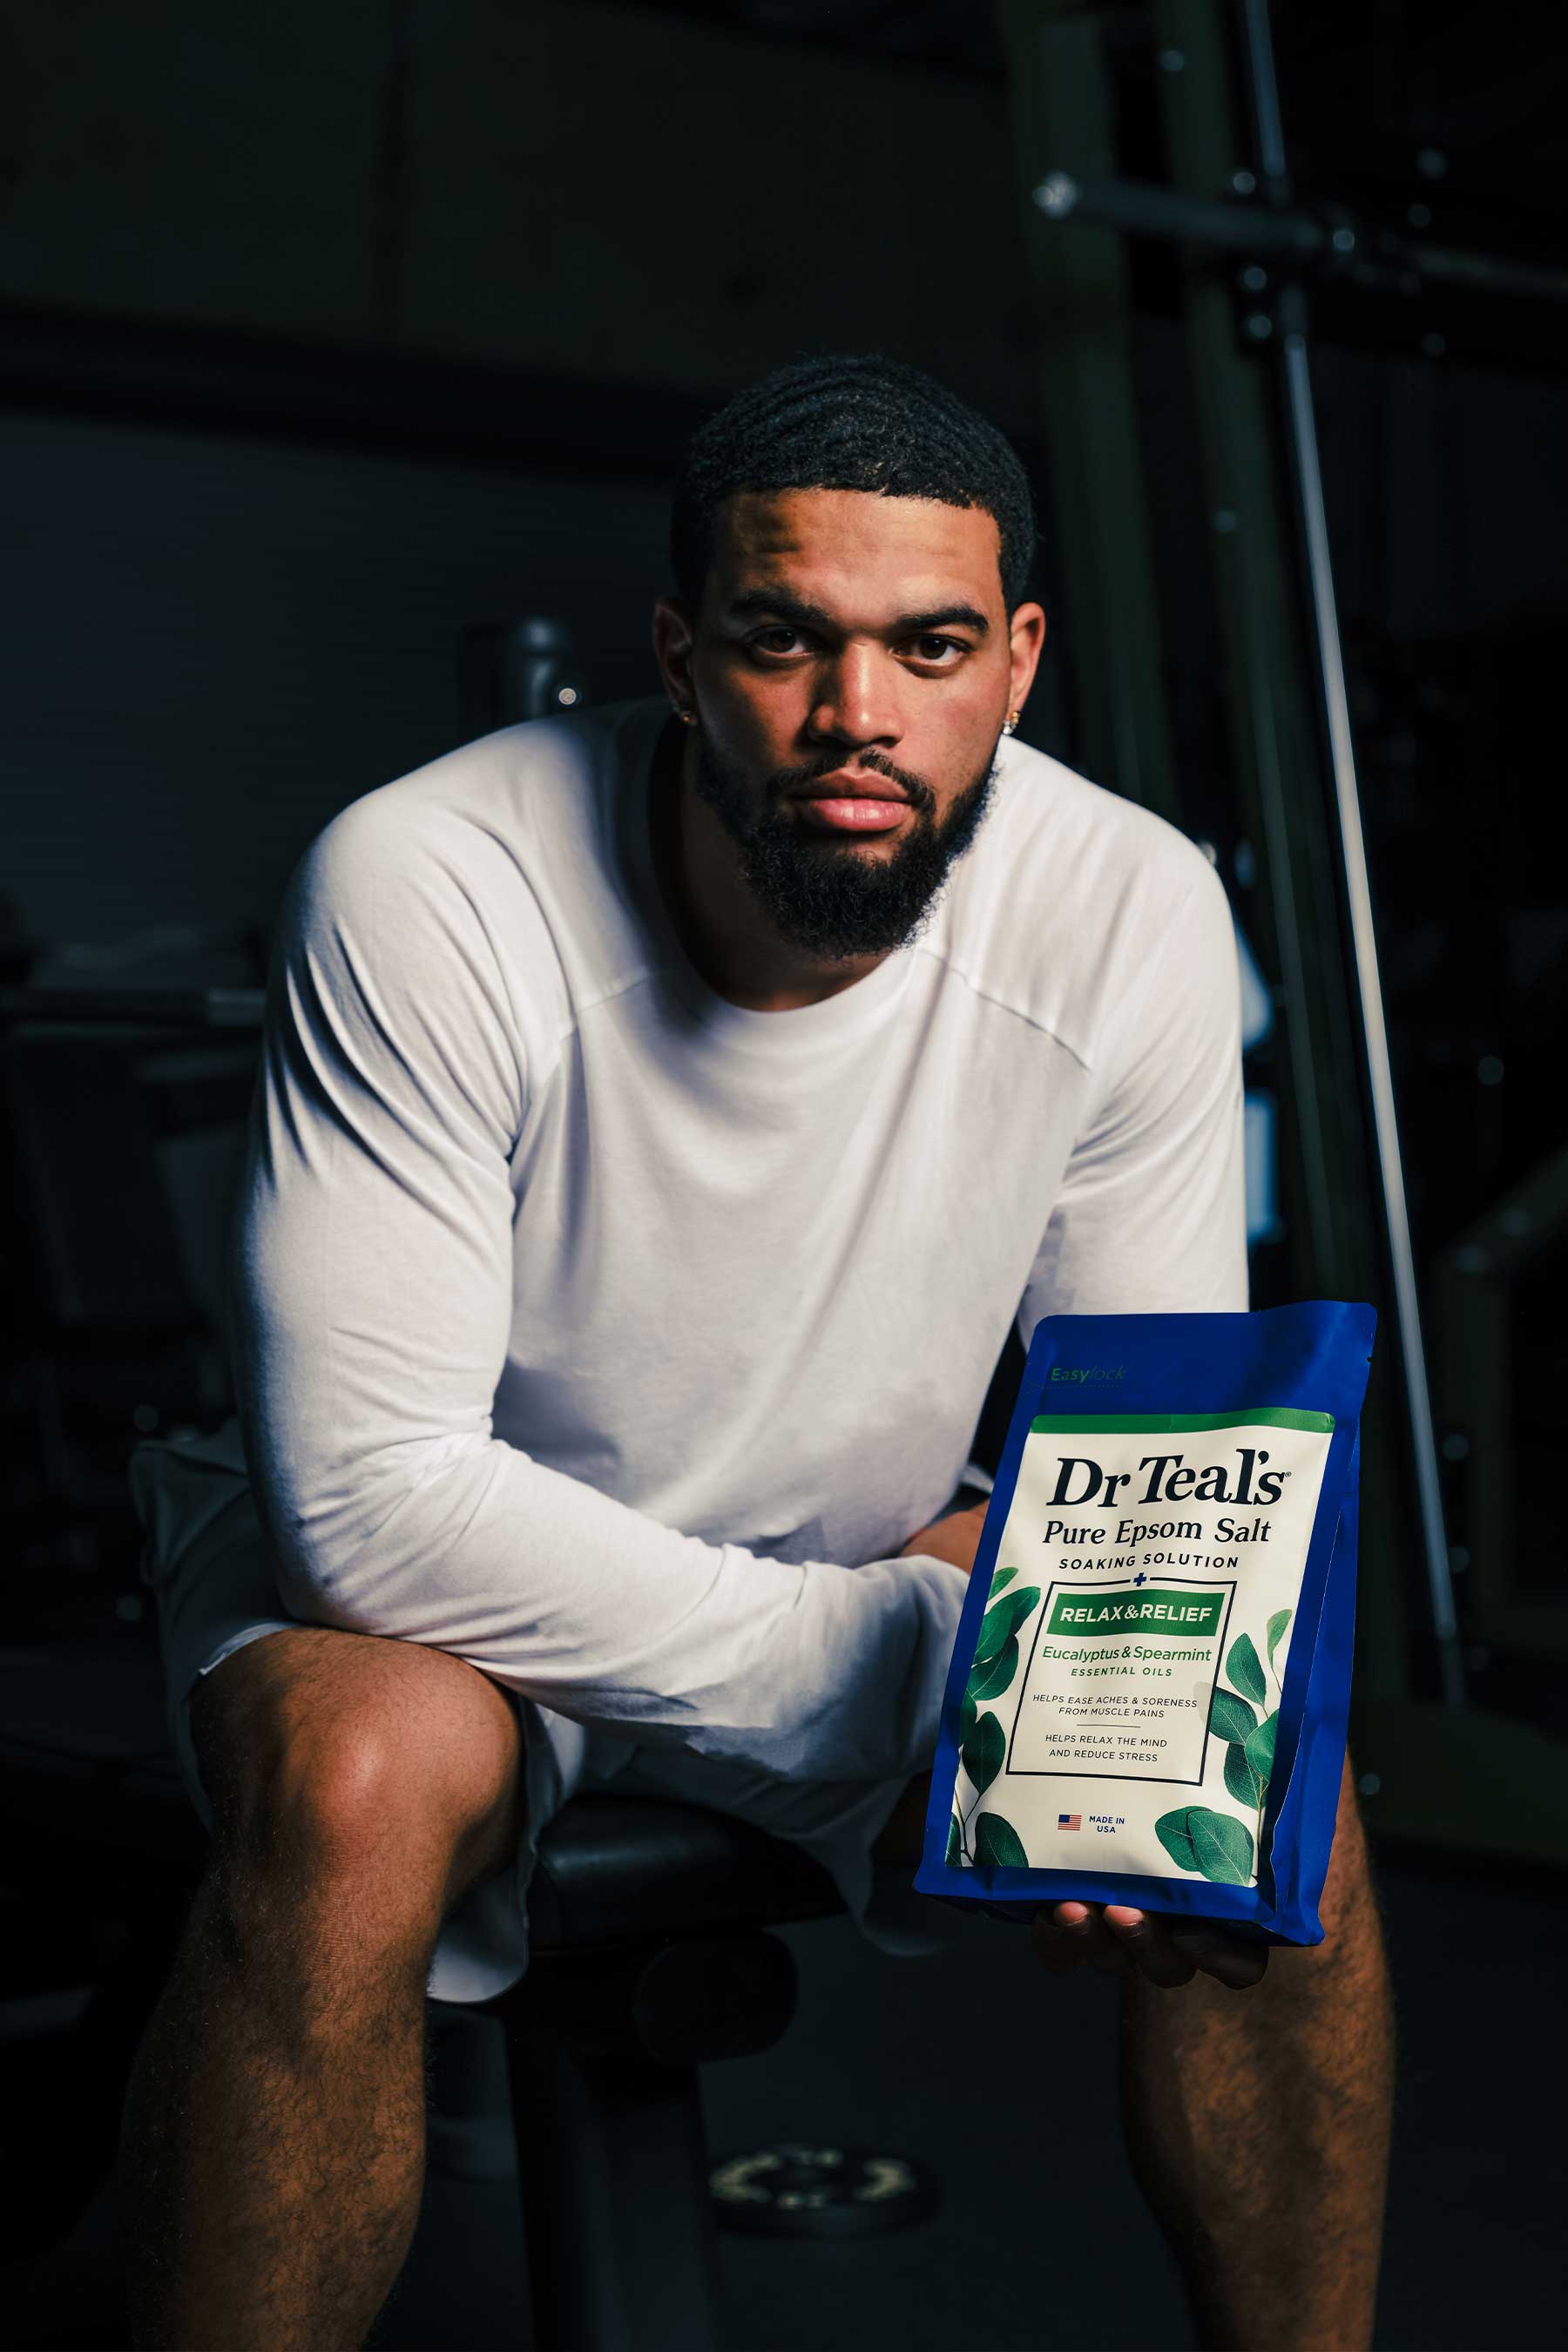 Recovery leads to success on the field and for Caleb Williams, the best player in college football, Dr Teal's helps him recharge and push his body to the limit.